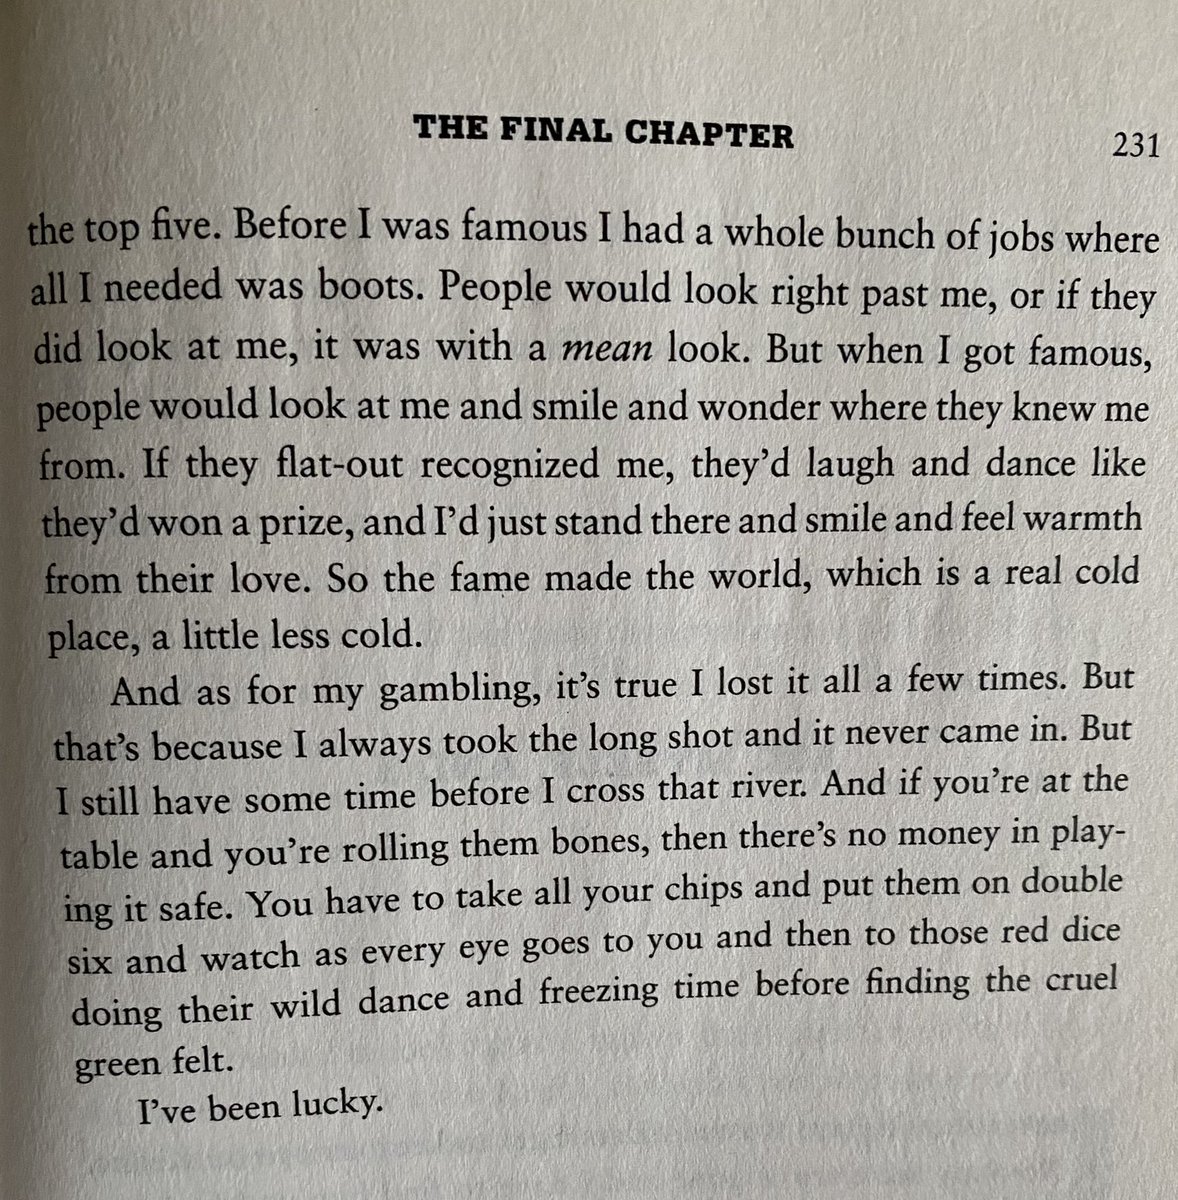 I think about these two and a half pages from Norm Macdonald’s book constantly. When I reviewed it, I wrote that they would “make for a fine eulogy”—and I swear I didn’t mean anything by it. But they do.